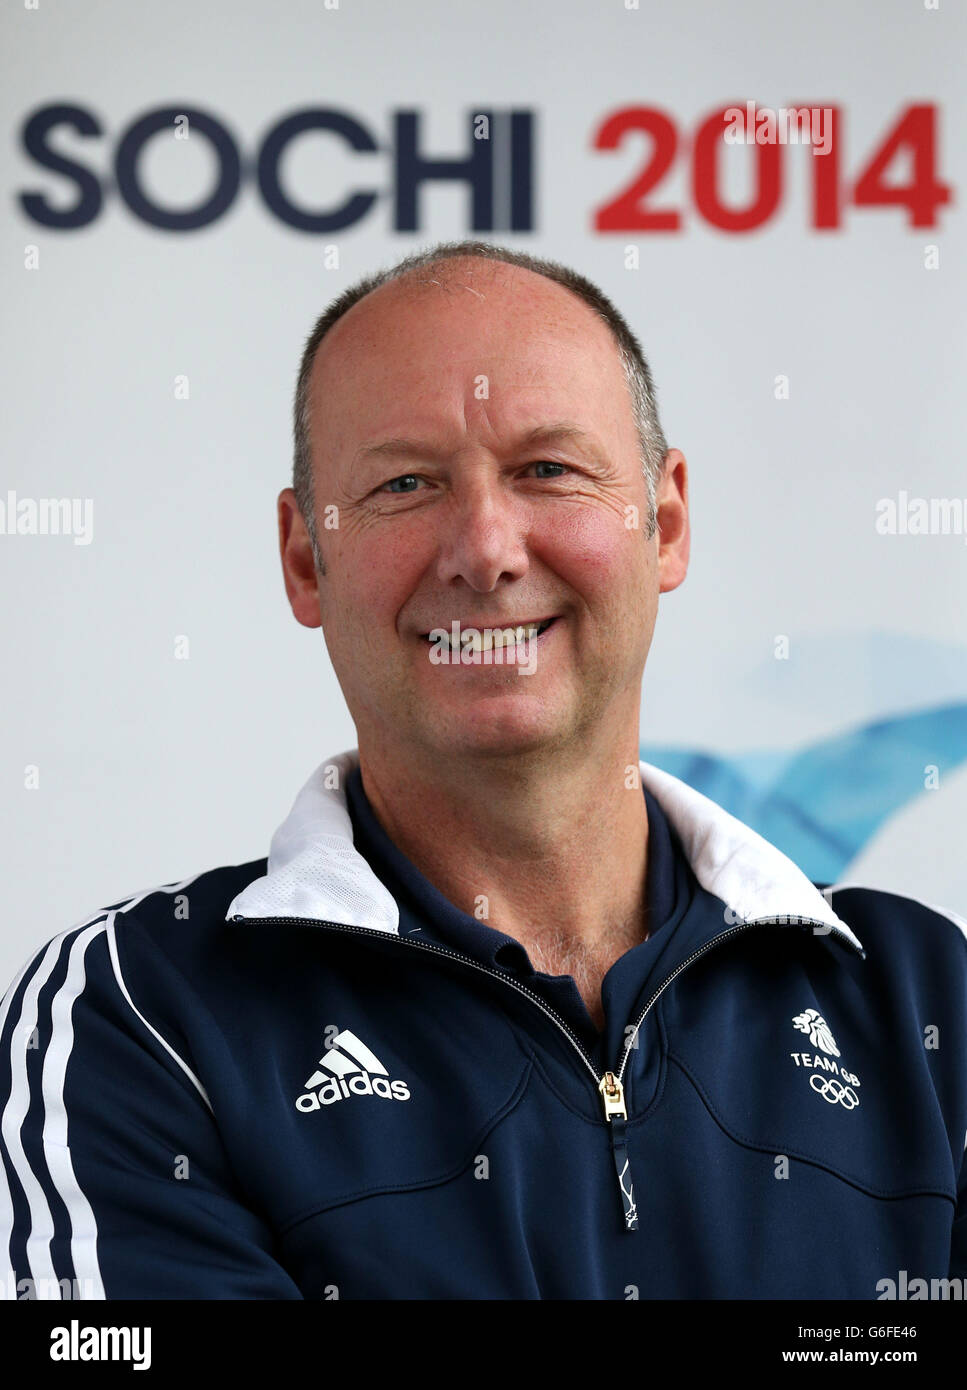 Sochi 2014 Chef De Mission Mike Hay during the announcement of the athletes selected to Team GB Mens Curling Team for the Sochi 2014 Olympic Winter Games at Stirling Sports Village, Stirling. Stock Photo